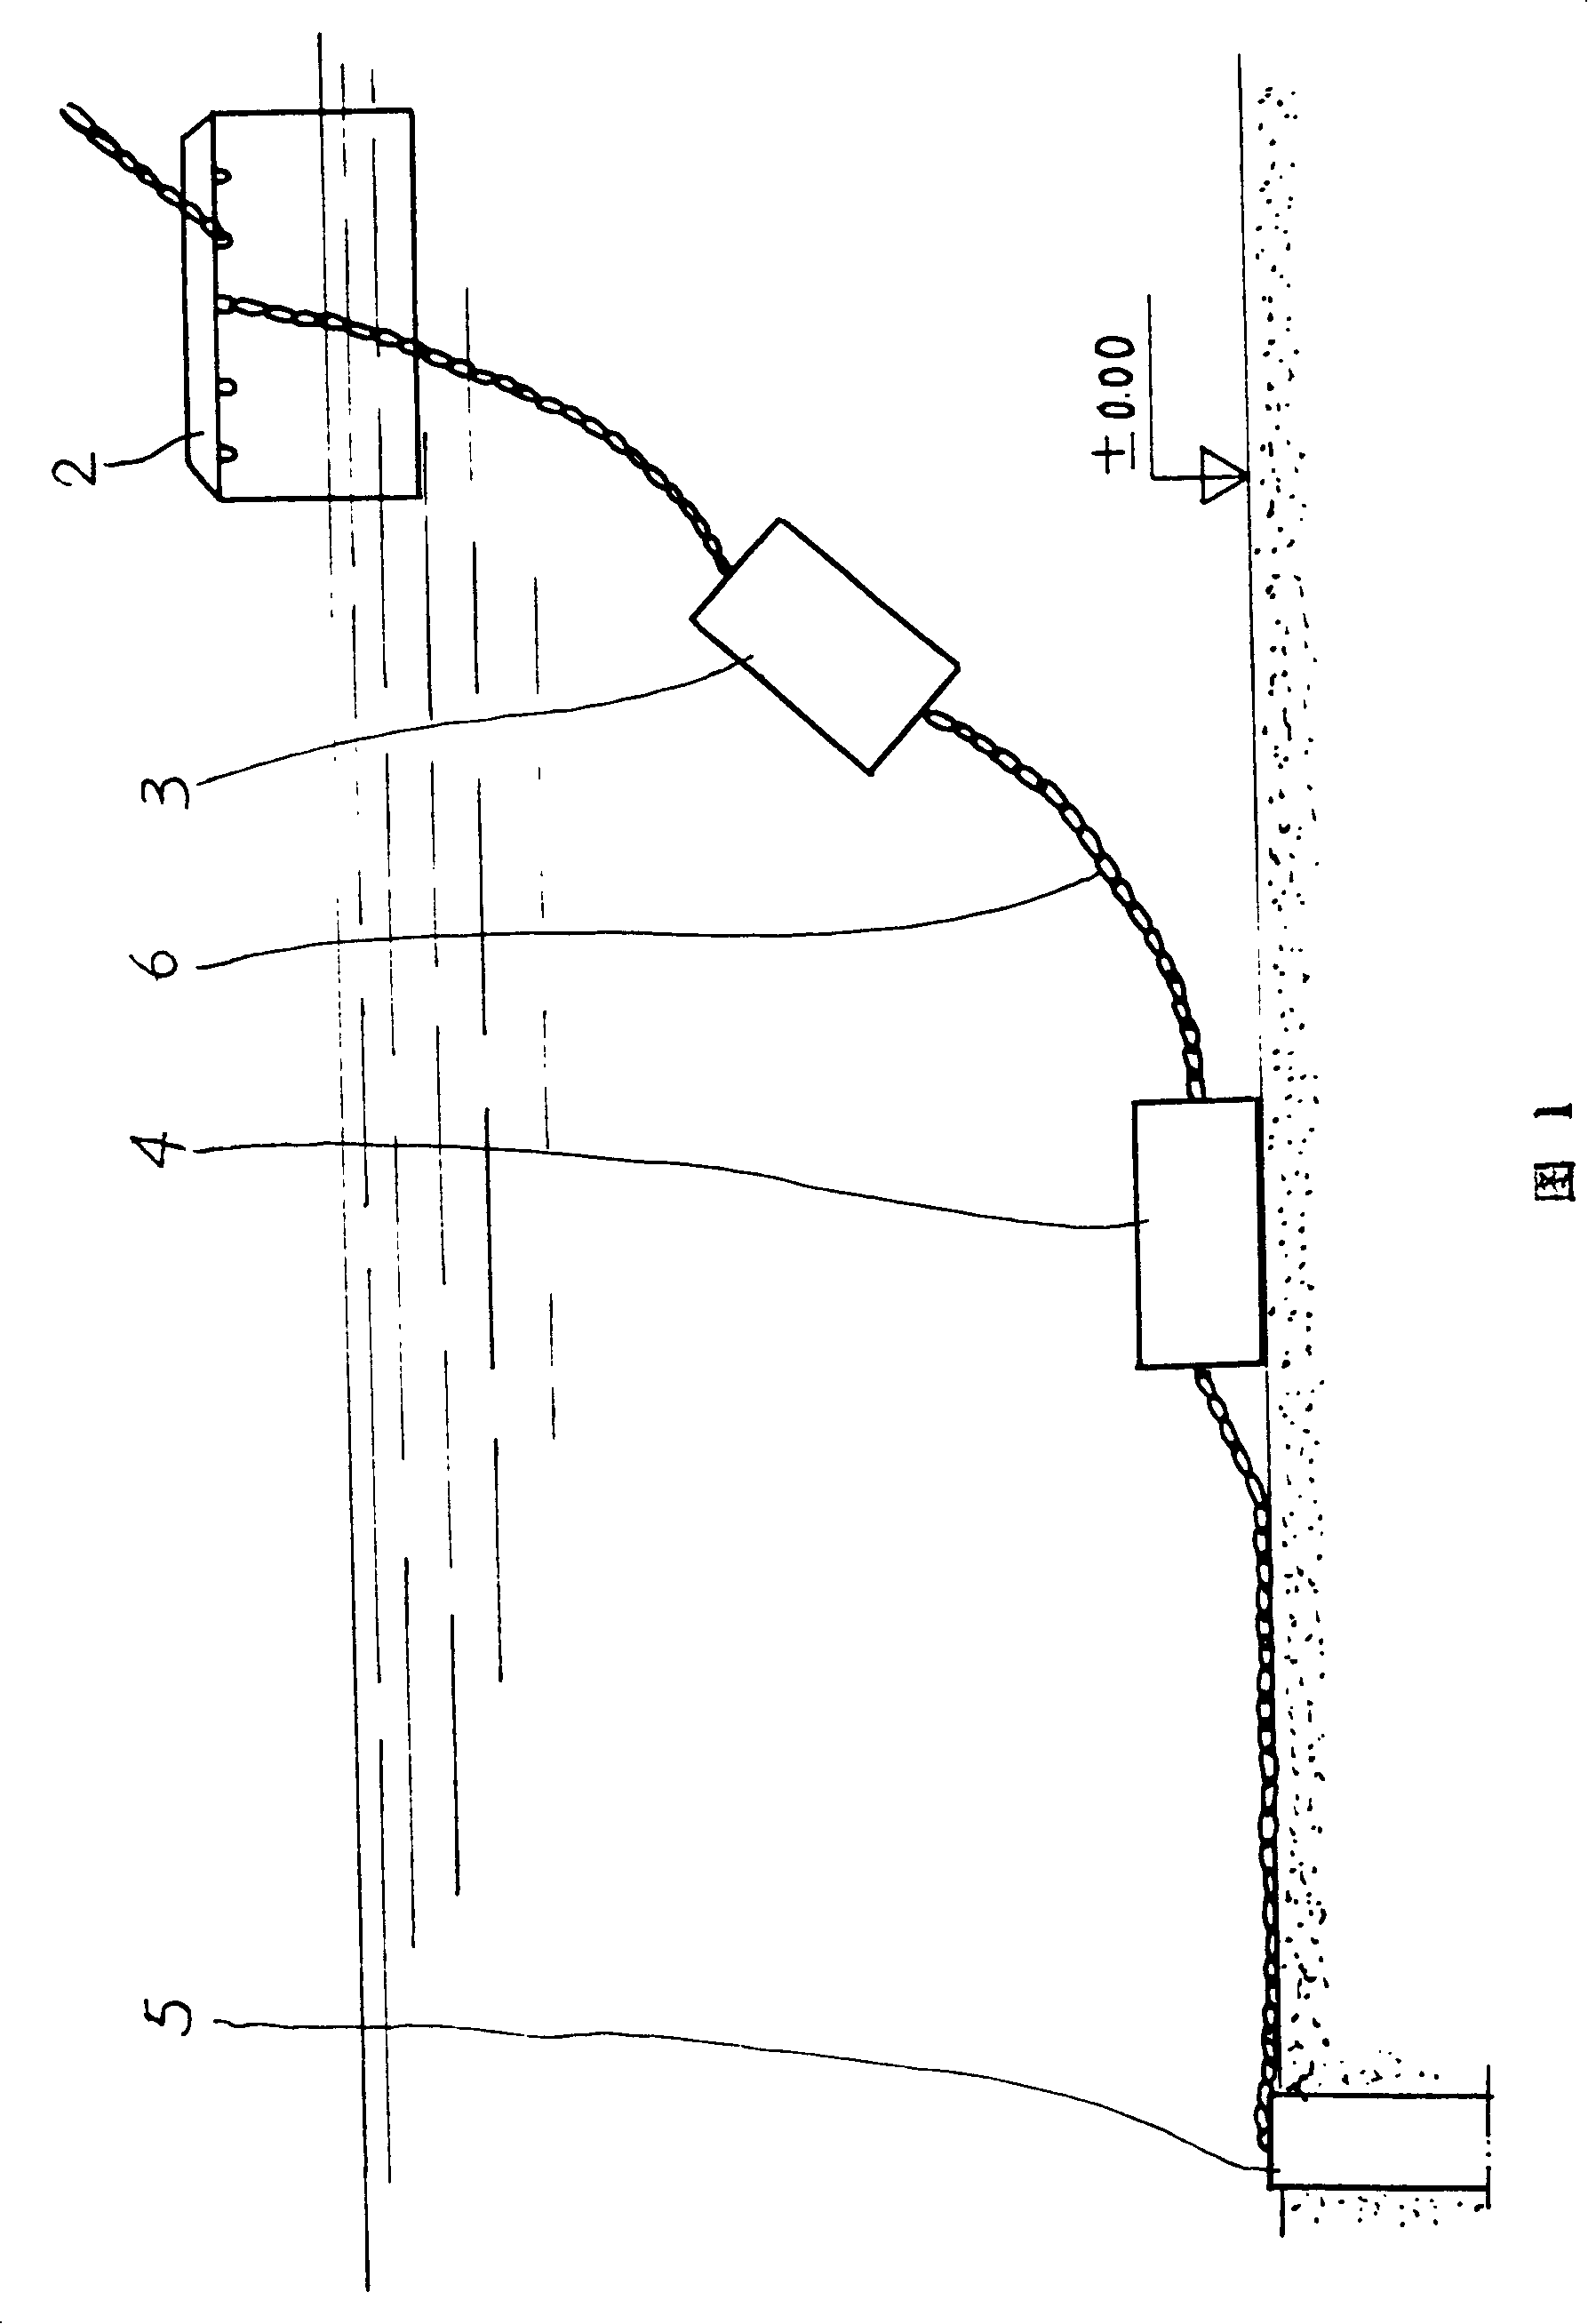 Off land loading and unloading anchoring system and anchoring method for liquid bulk cargo carrier